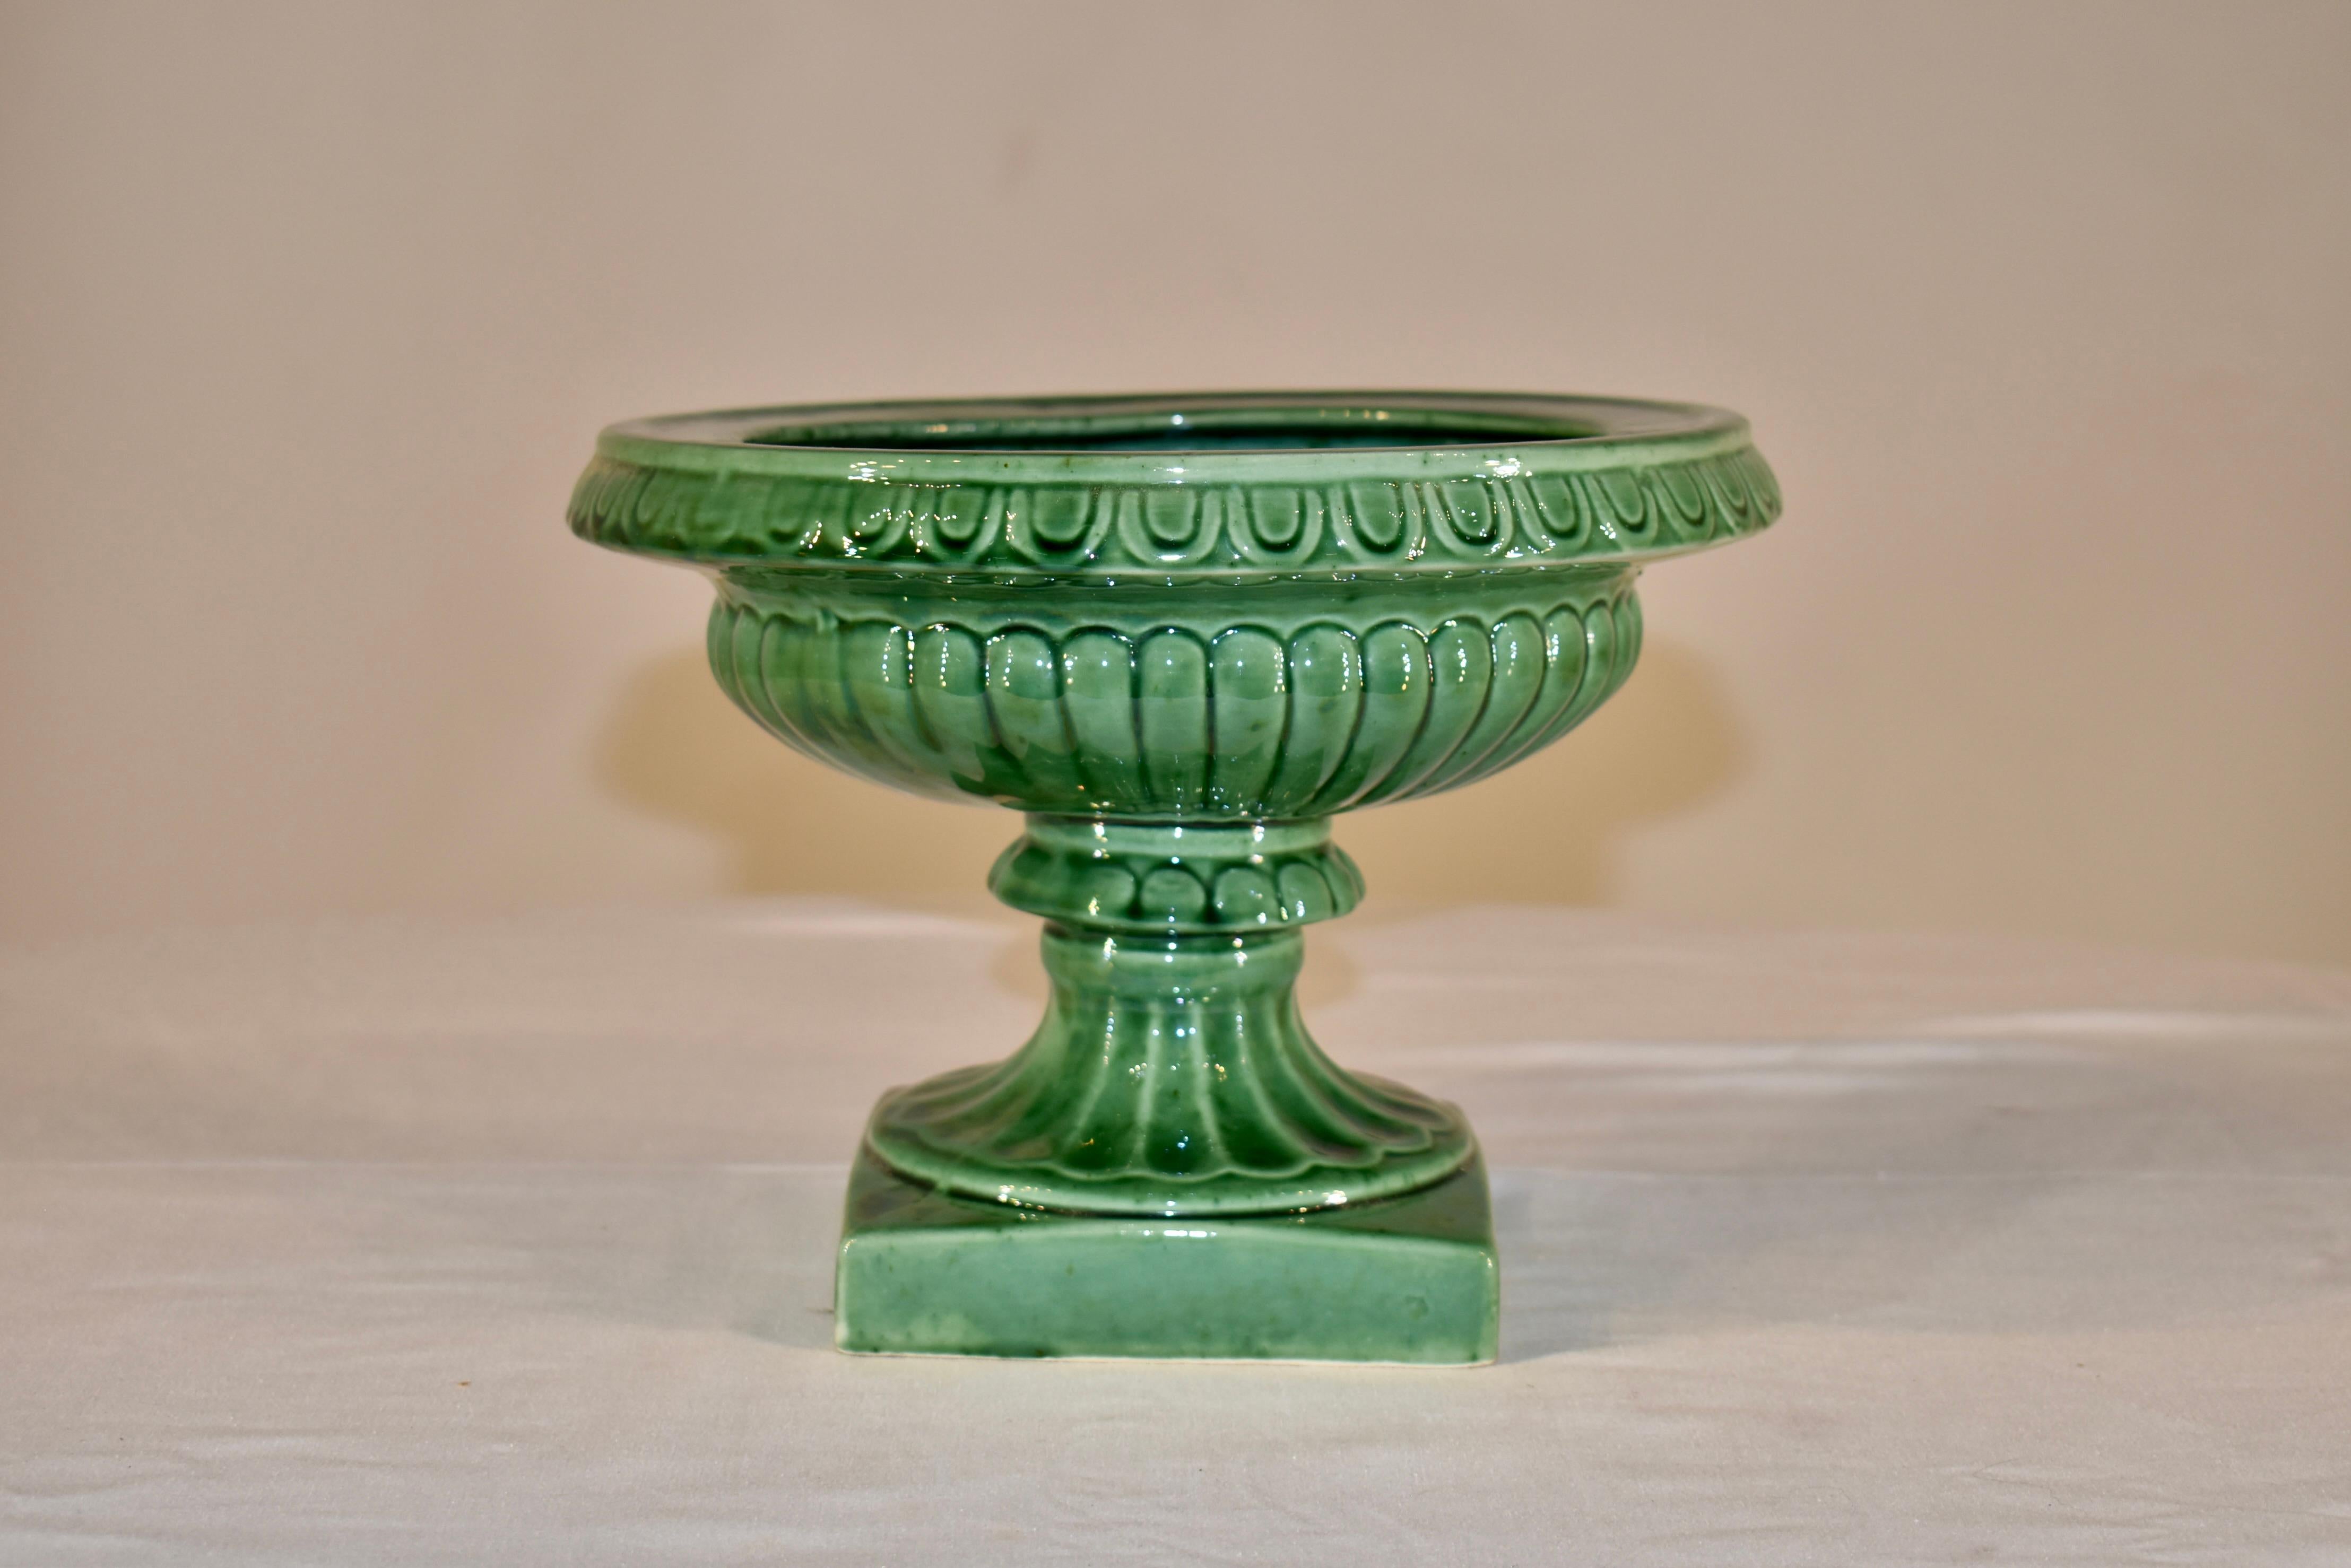 Circa 1930's majolica glazed planter, marked Elaine Goddard, Dartmouth Pottery.  This is a lovely piece and would be amazing filled with flowers, or used as a pedestal with a dish on top for serving on a gorgeous table.  The form is like a Grecian